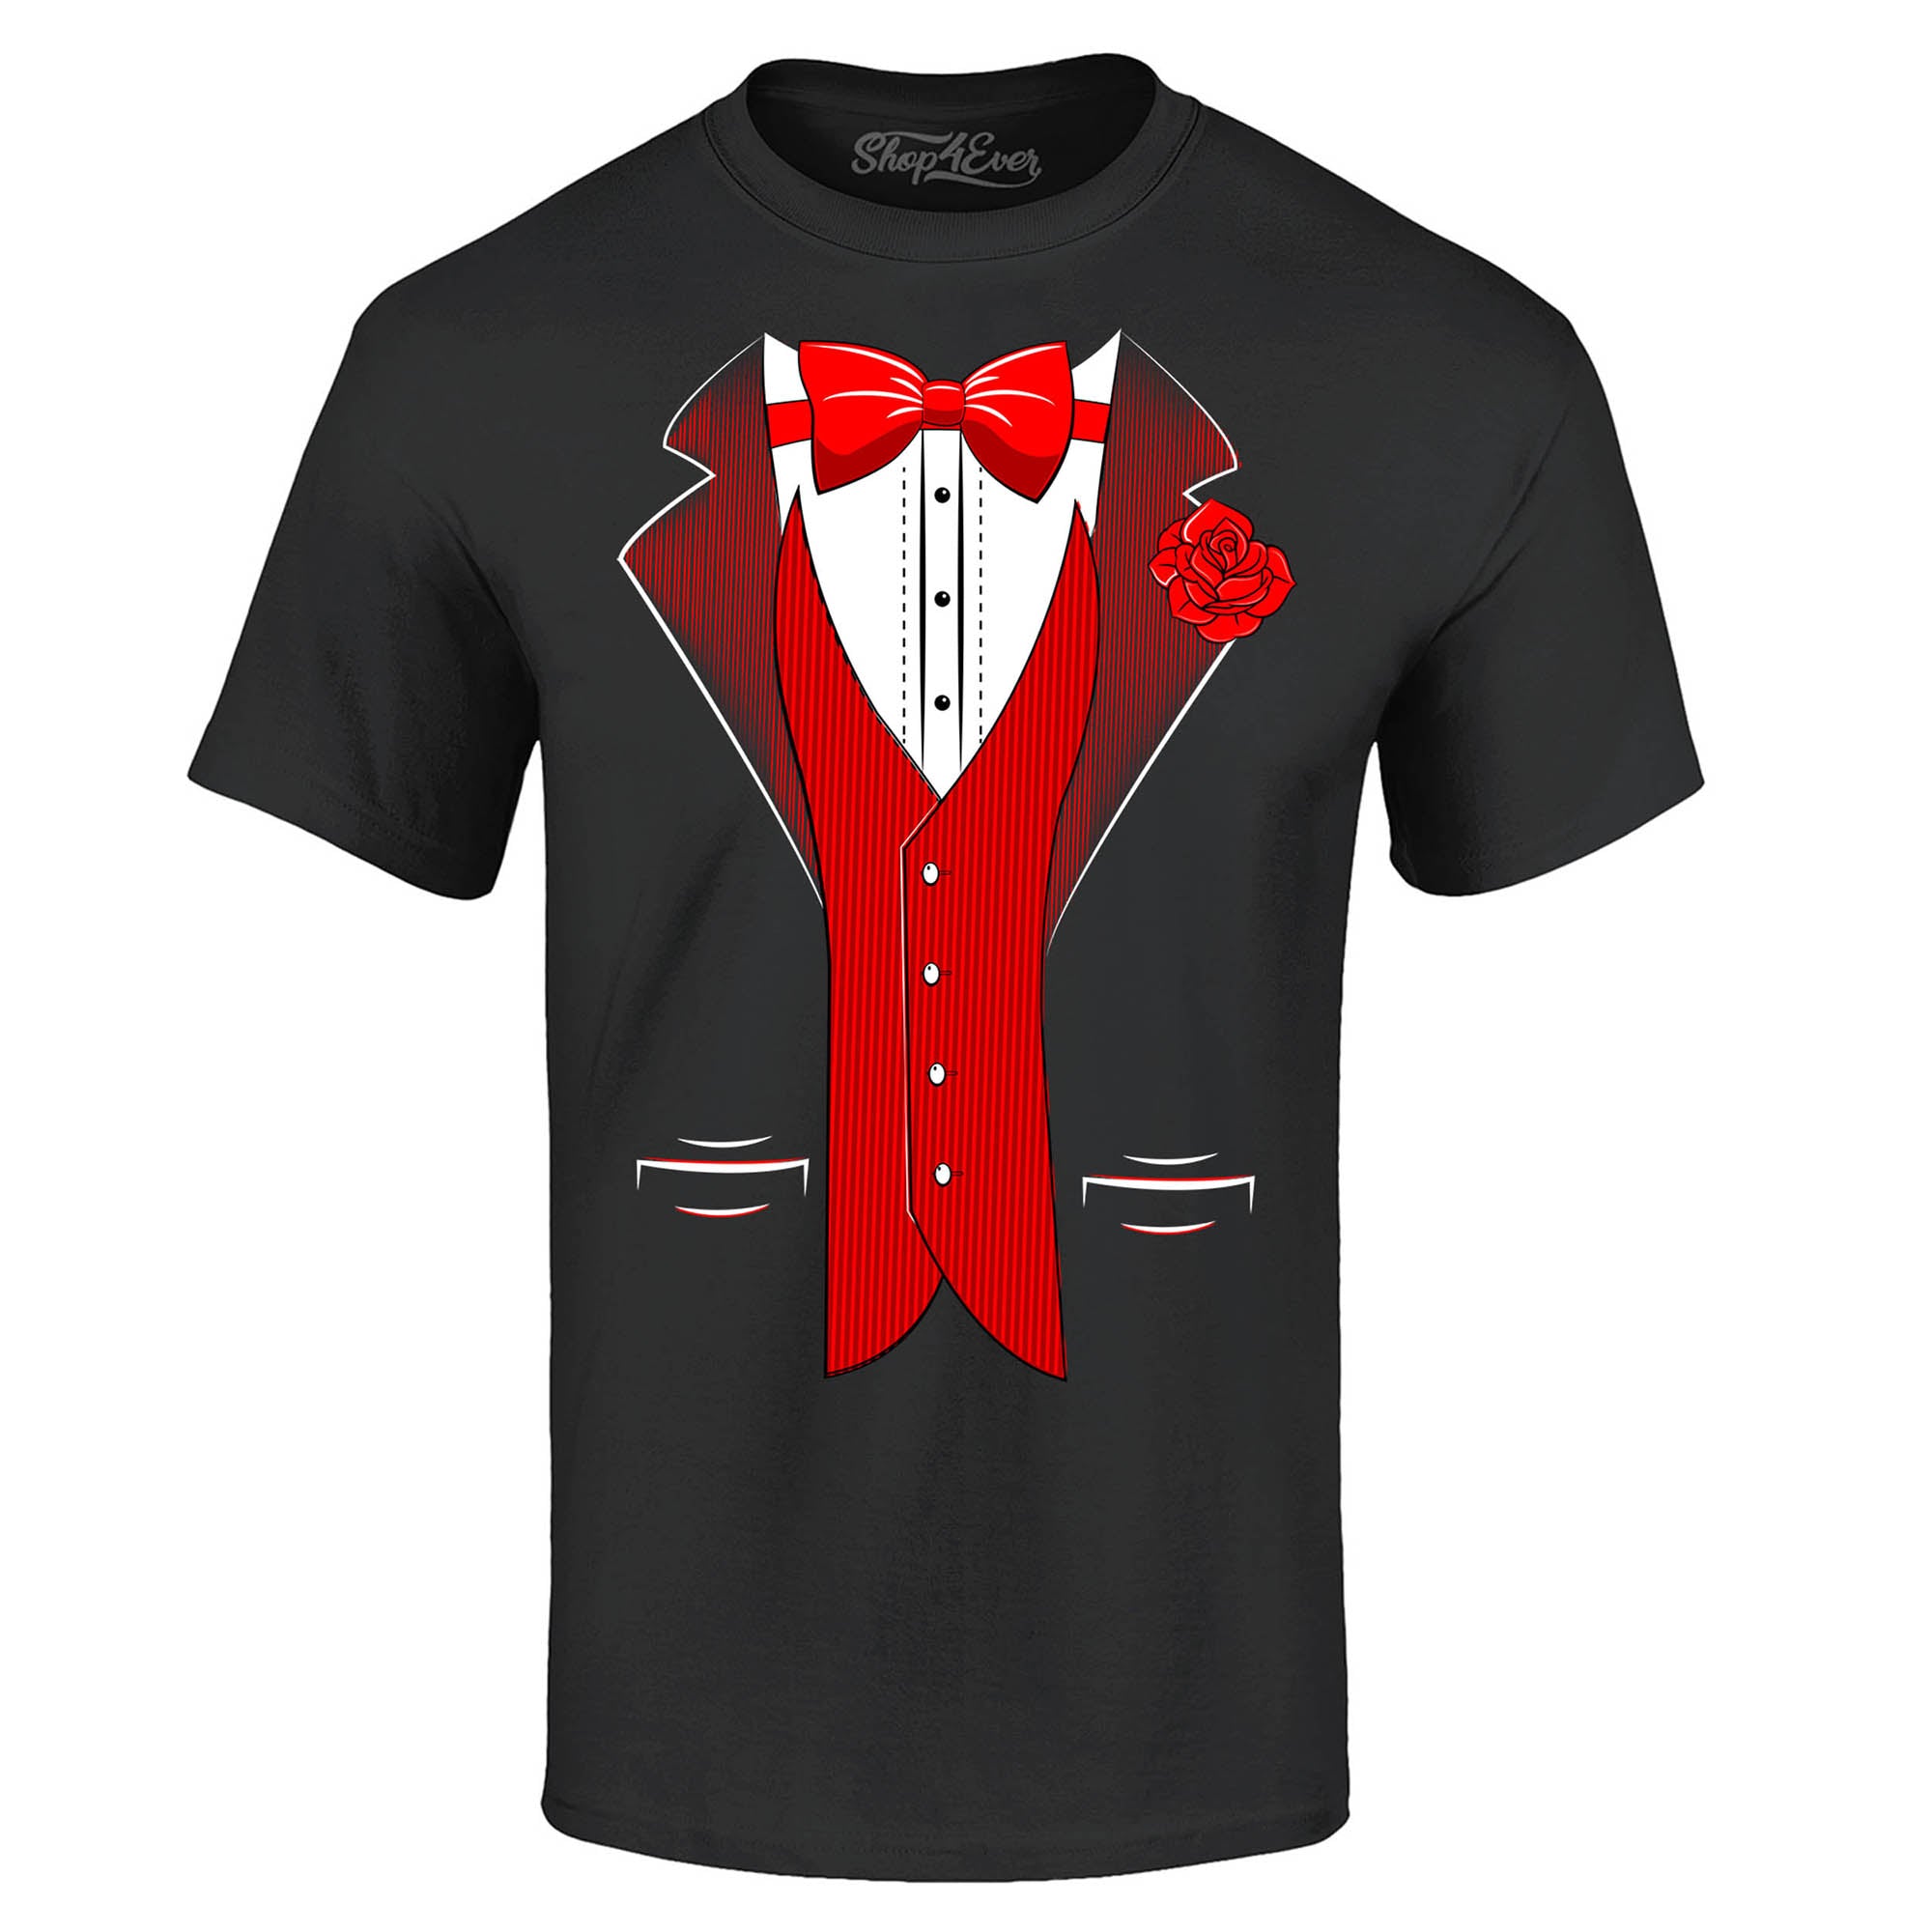 Classic Tuxedo with Red Rose T-Shirt Party Costume Shirts